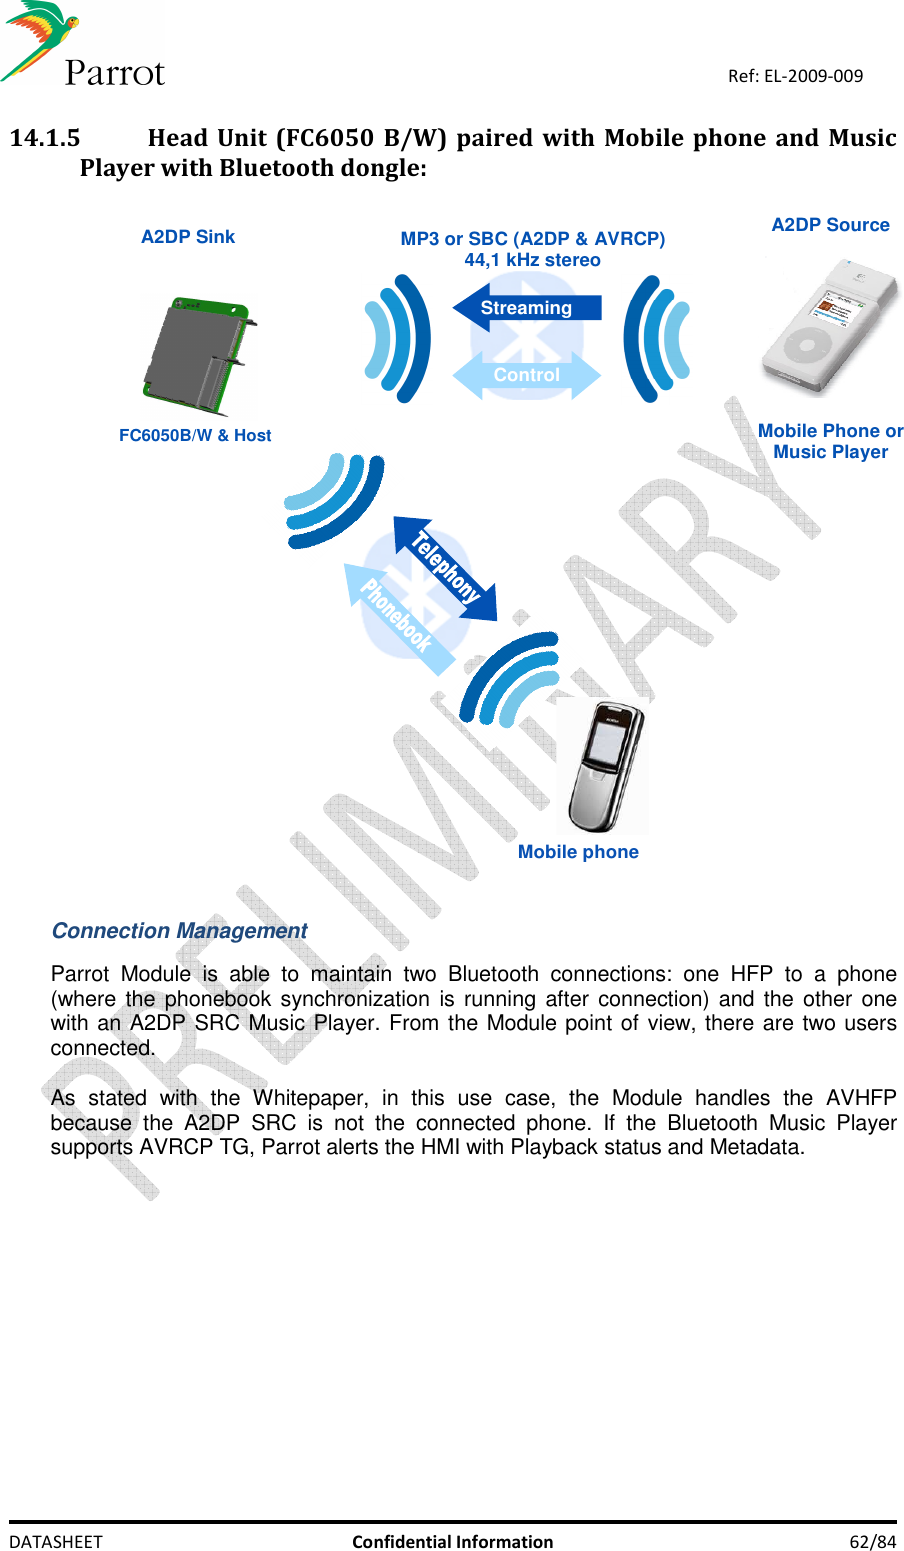    DATASHEET  Confidential Information  62/84 Ref: EL-2009-009 14.1.5 Head Unit  (FC6050  B/W)  paired  with  Mobile  phone  and  Music Player with Bluetooth dongle:   A2DP Source A2DP SinkMobile Phone orMusic Player MP3 or SBC (A2DP &amp; AVRCP)44,1 kHz stereo StreamingControlMobile phone FC6050B/W &amp; Host   Connection Management  Parrot  Module  is  able  to  maintain  two  Bluetooth  connections:  one  HFP  to  a  phone (where the  phonebook synchronization is running after connection) and the other  one with an A2DP SRC Music Player. From the Module point of view, there are two users connected.  As  stated  with  the  Whitepaper,  in  this  use  case,  the  Module  handles  the  AVHFP because  the  A2DP  SRC  is  not  the  connected  phone.  If  the  Bluetooth  Music  Player supports AVRCP TG, Parrot alerts the HMI with Playback status and Metadata. 